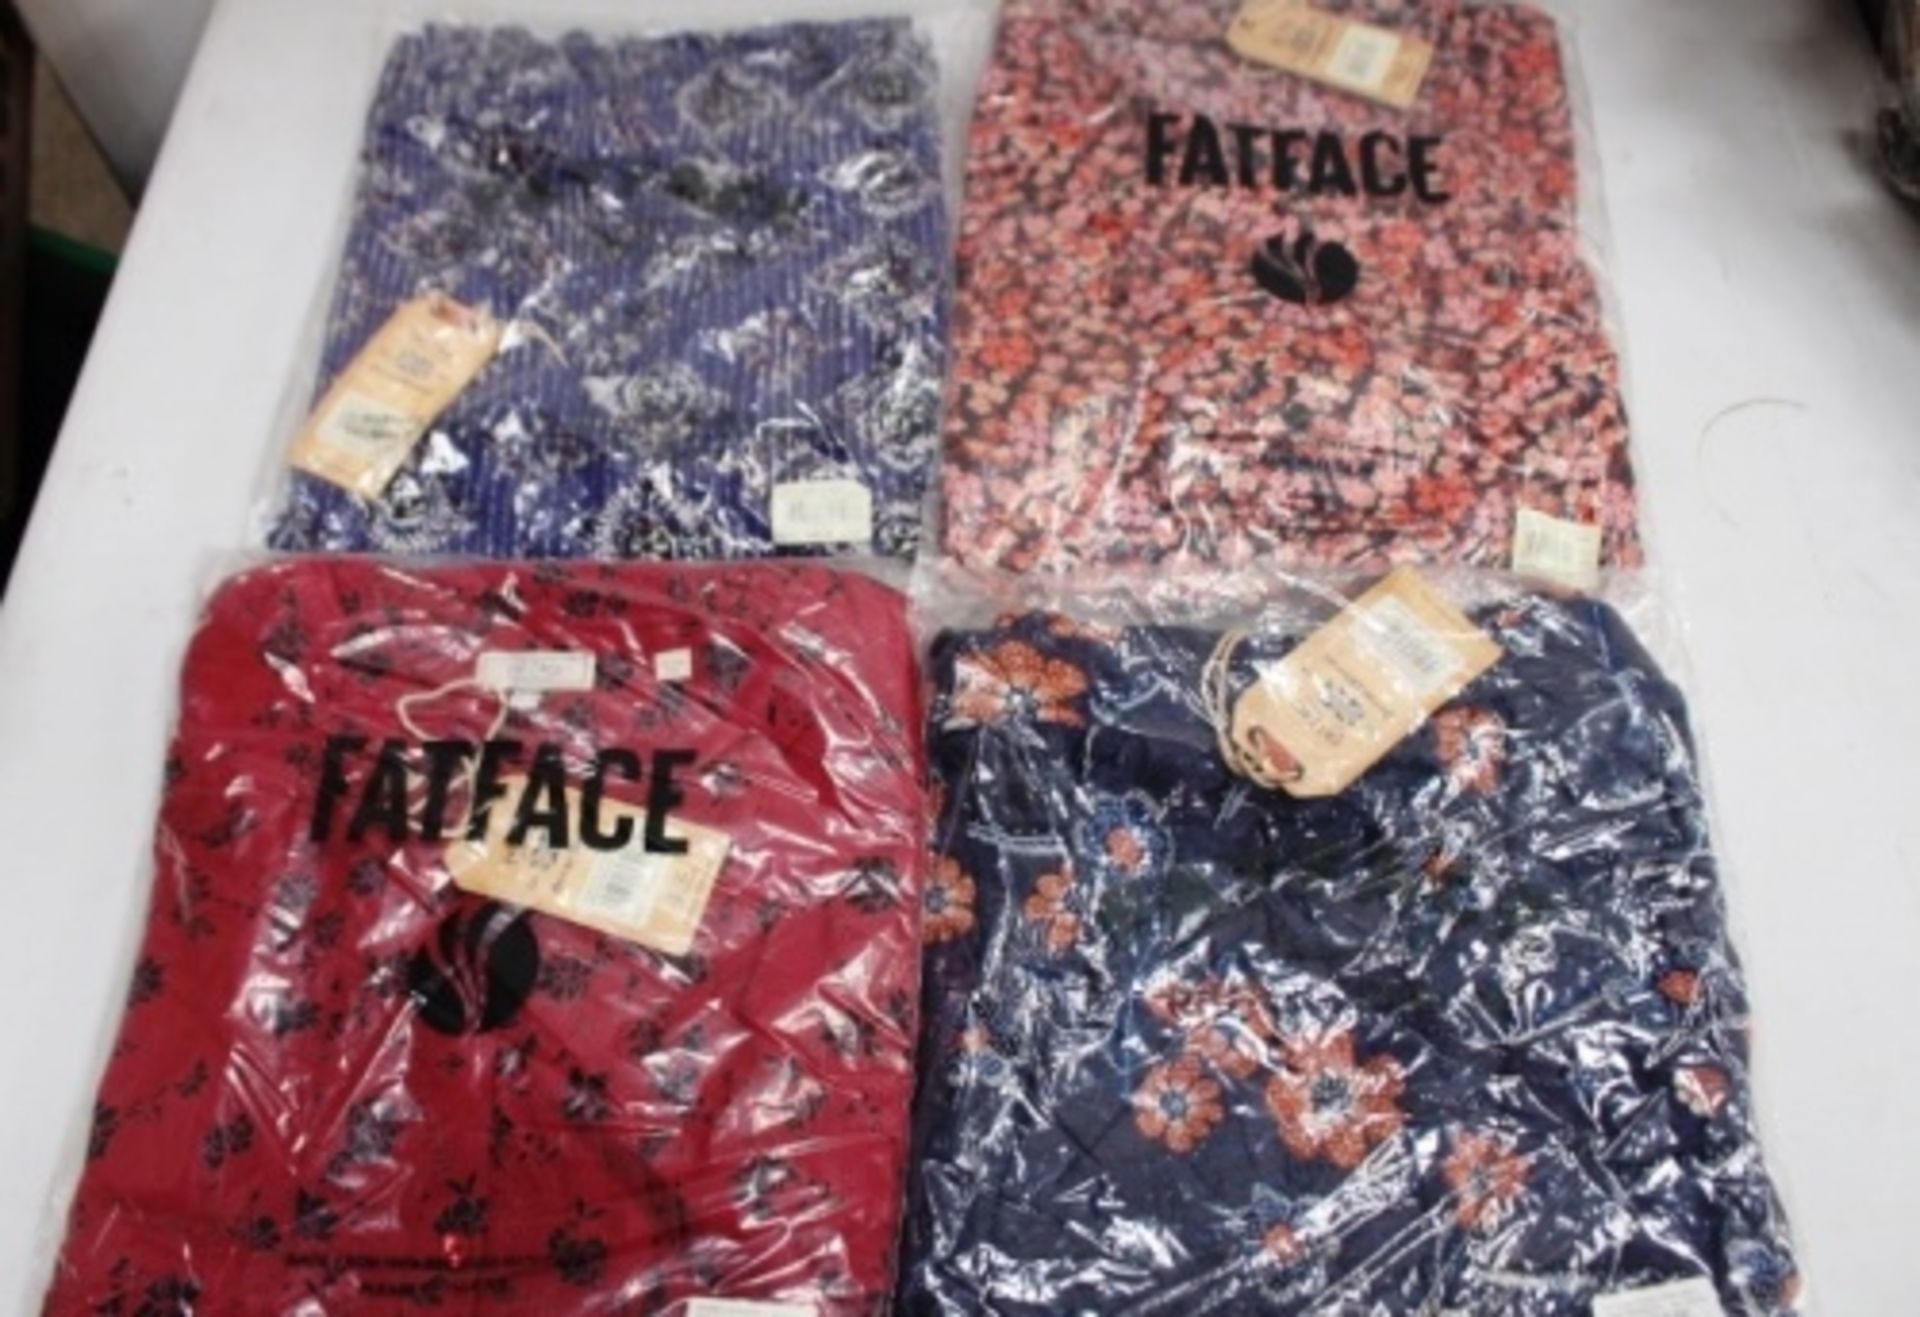 10 x assorted Fat Face dresses in various styles and sizes - New with tags (EB4) - Image 3 of 3